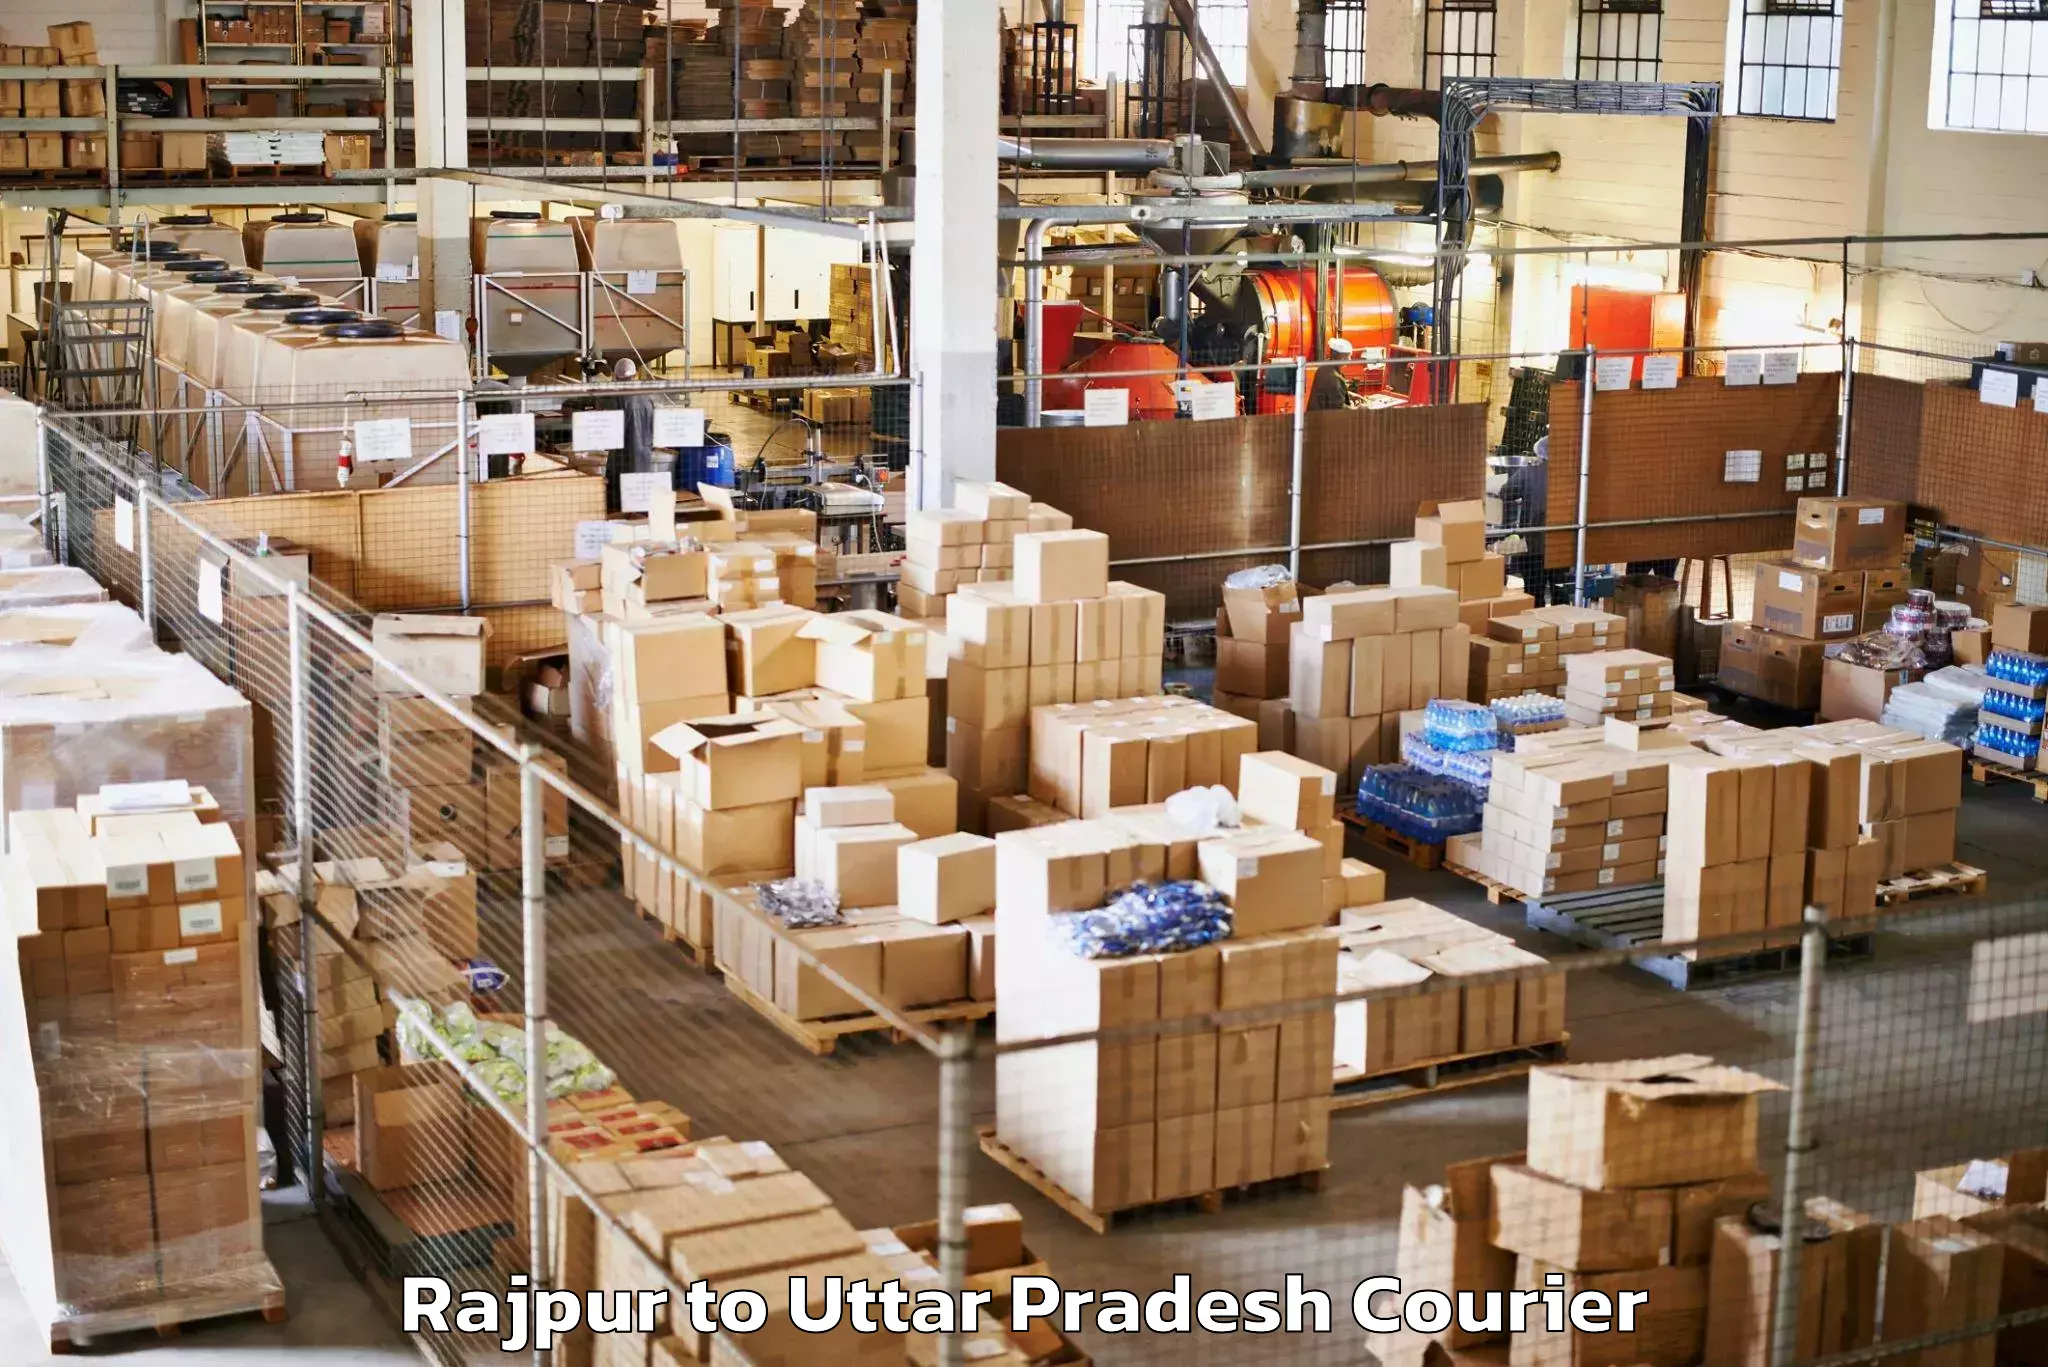 Instant baggage transport quote Rajpur to Nichlaul